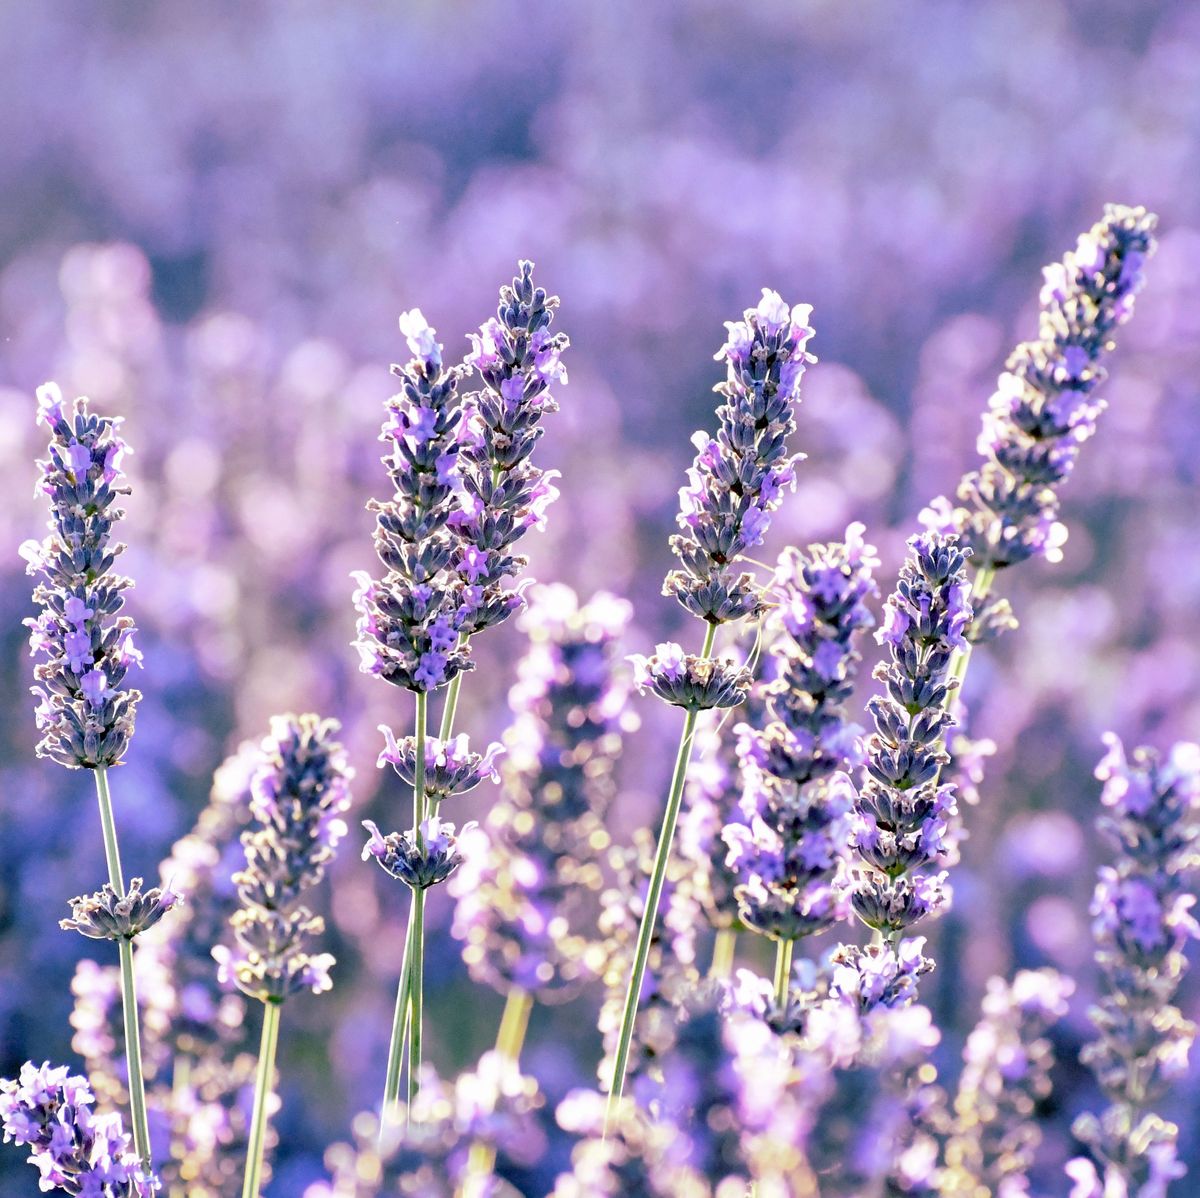 How to care for your lavender plant indoors